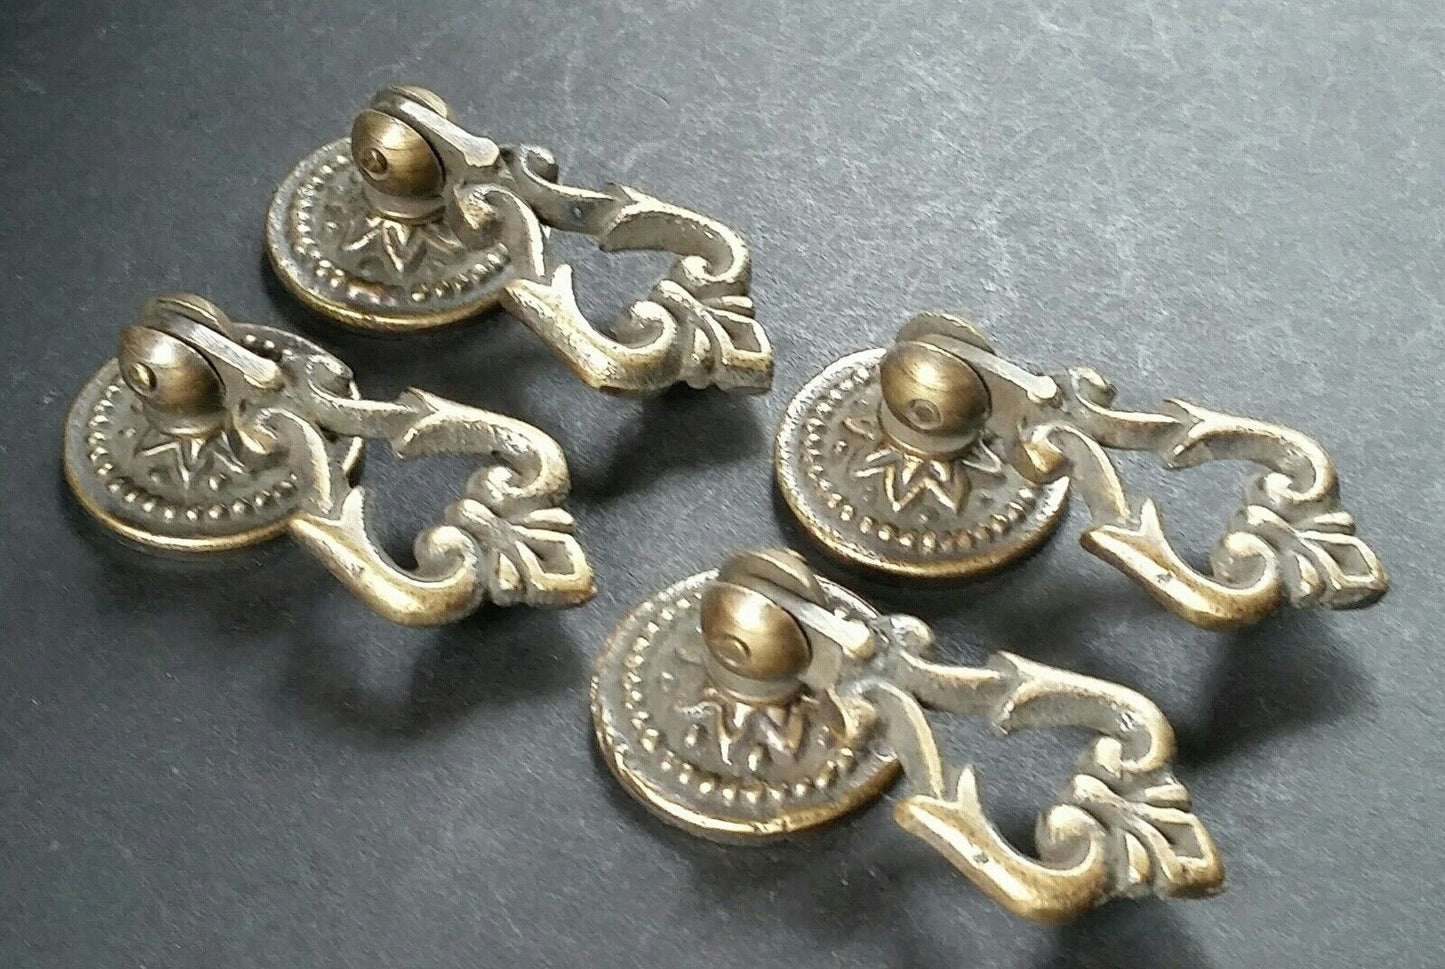 4 Teardrop Handles Pulls Ornate Victorian Antique Style 2" with 4 bolts  # H8